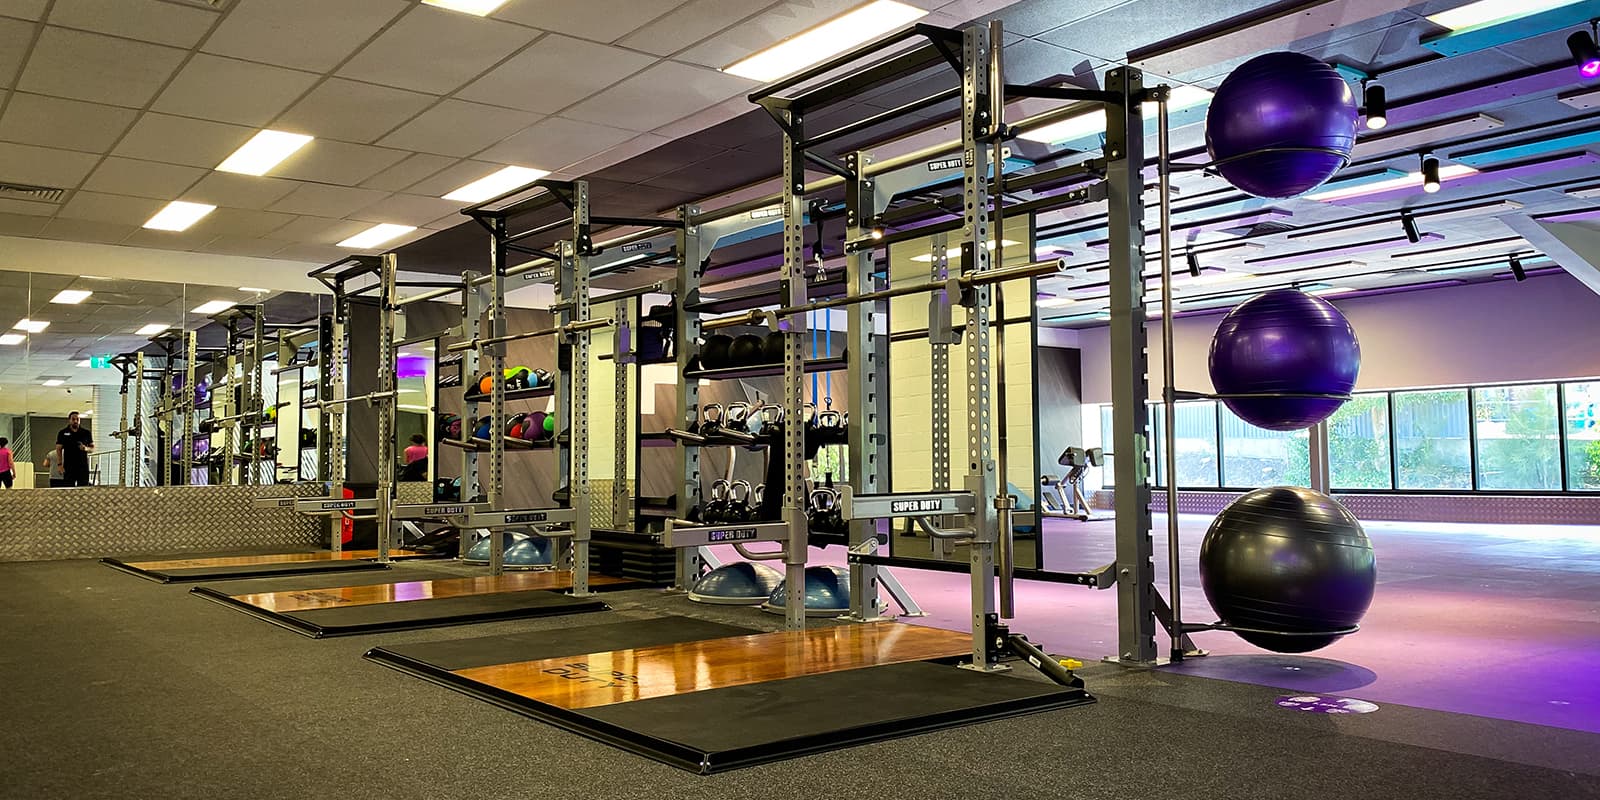 Anytime Fitness - Hills Action Center